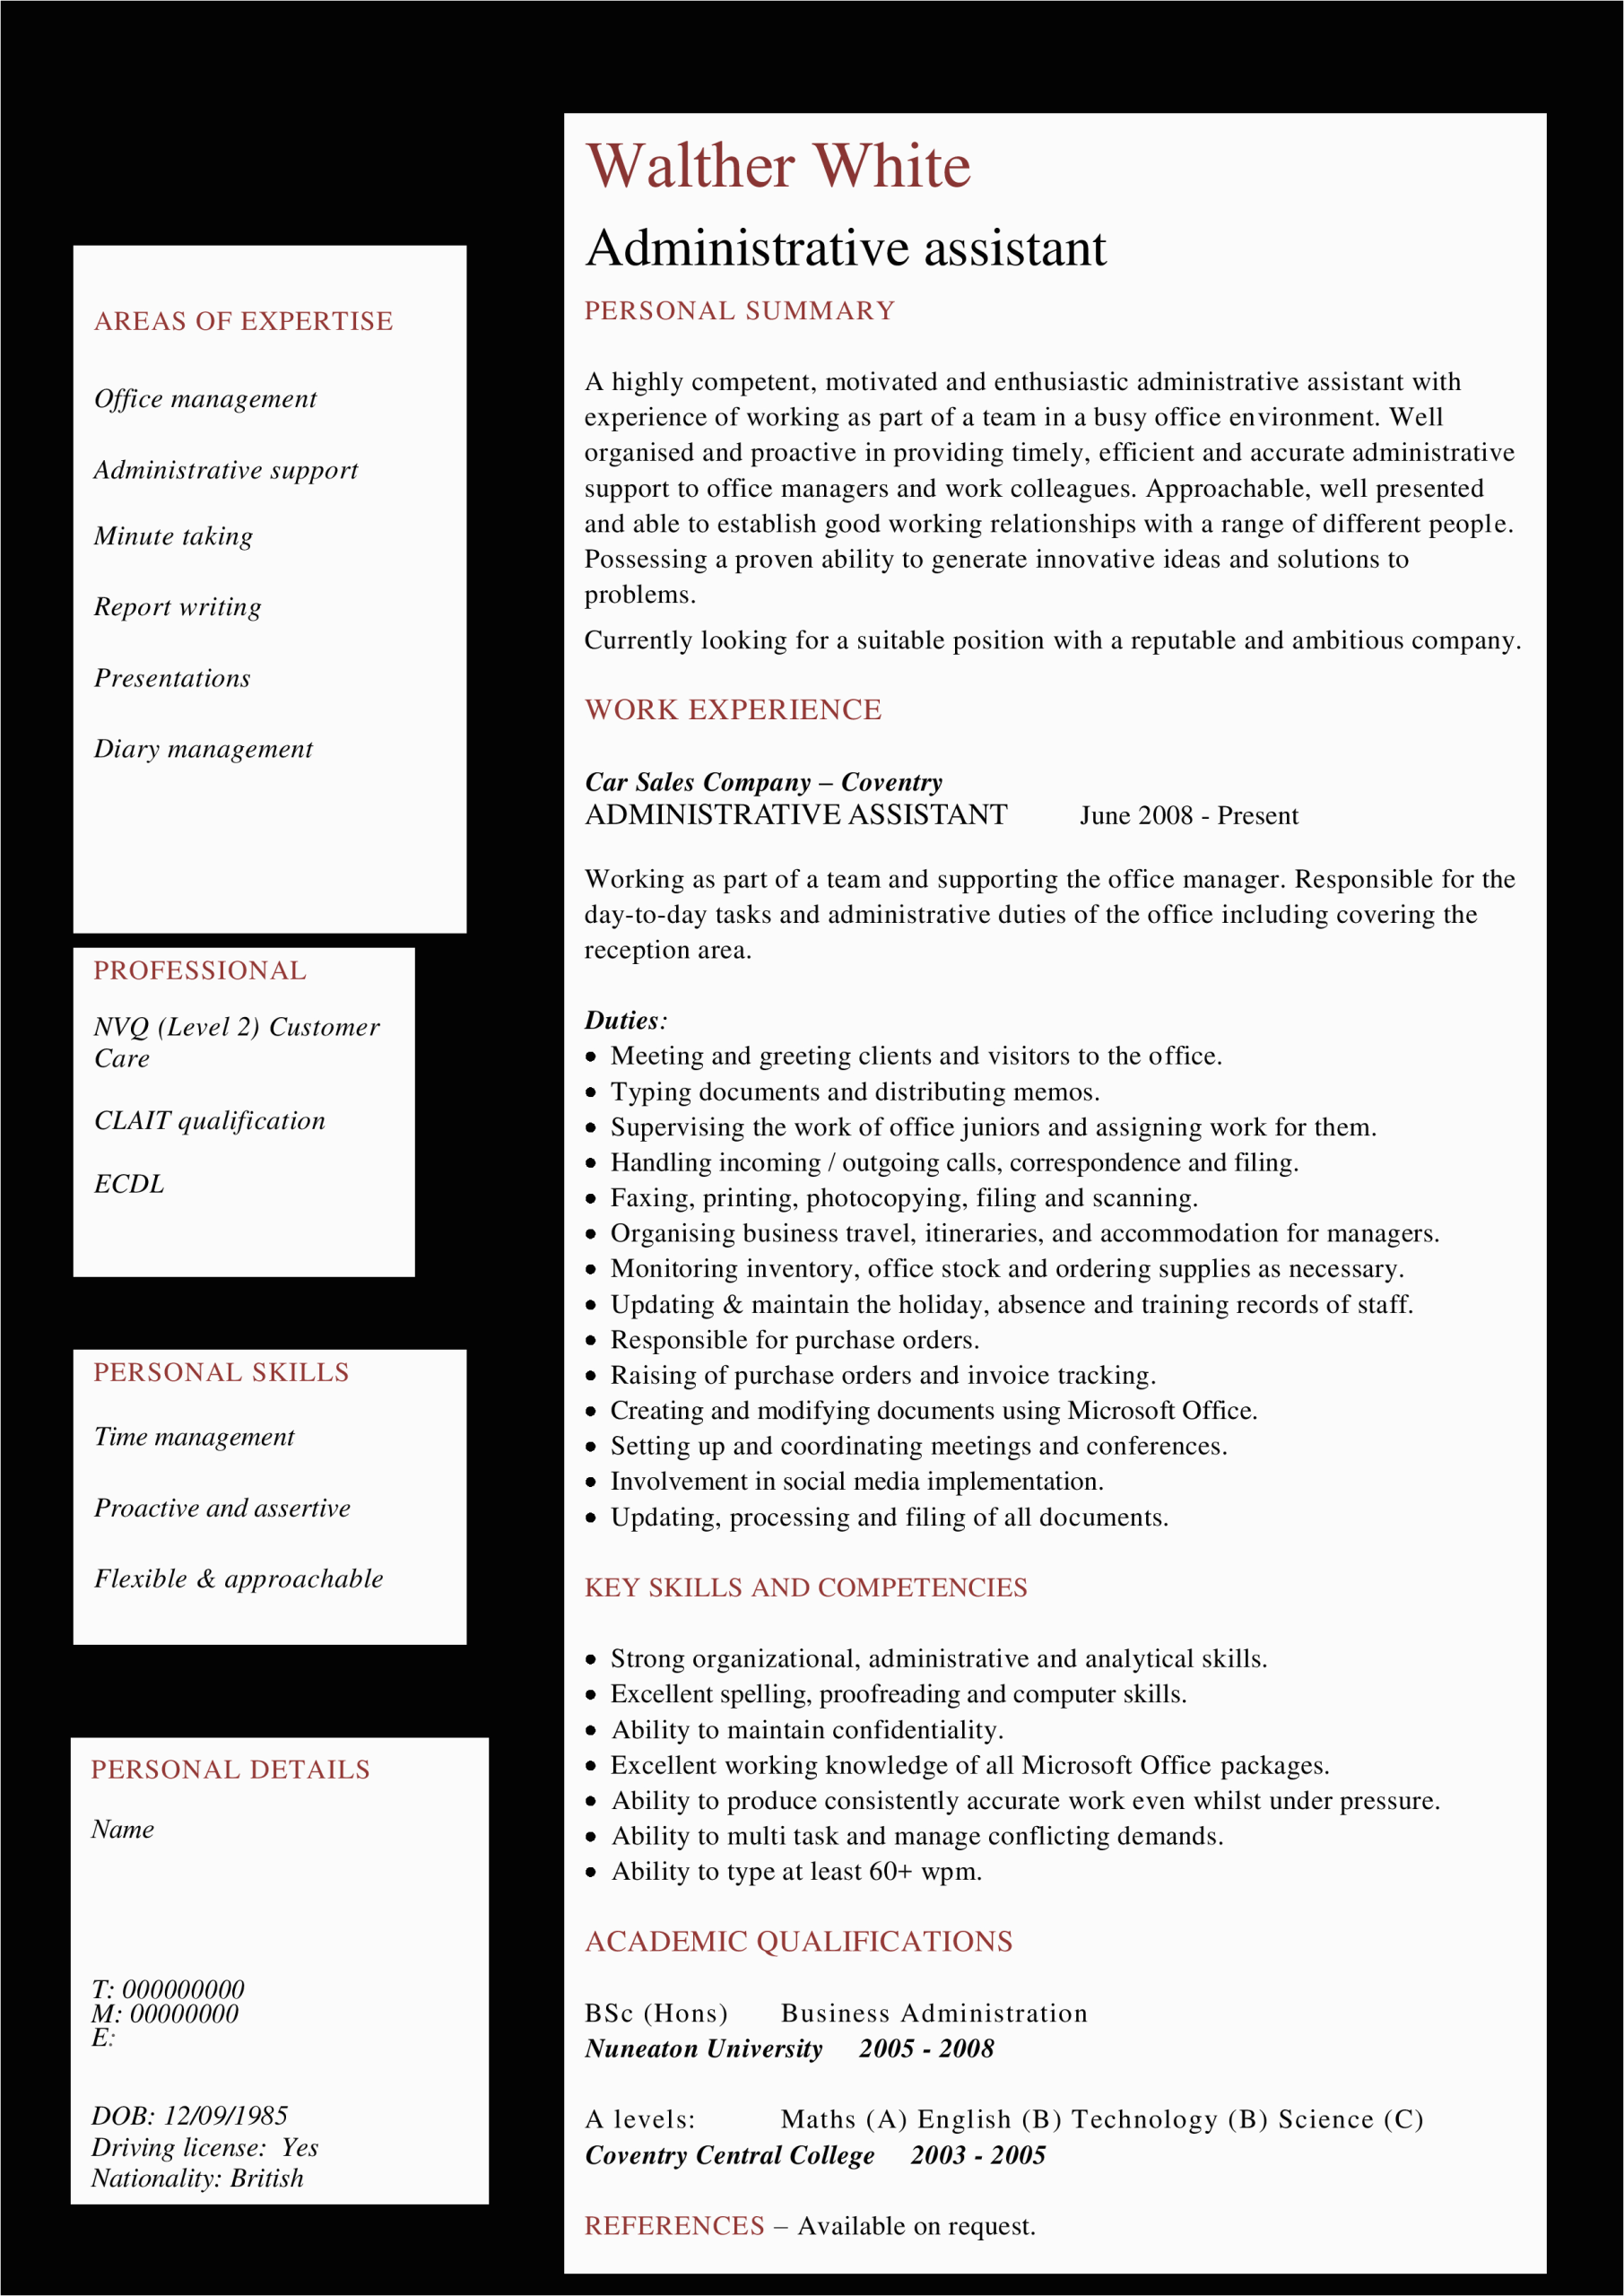 Job Experience On A Resume Sample Administrative Work Experience Resume